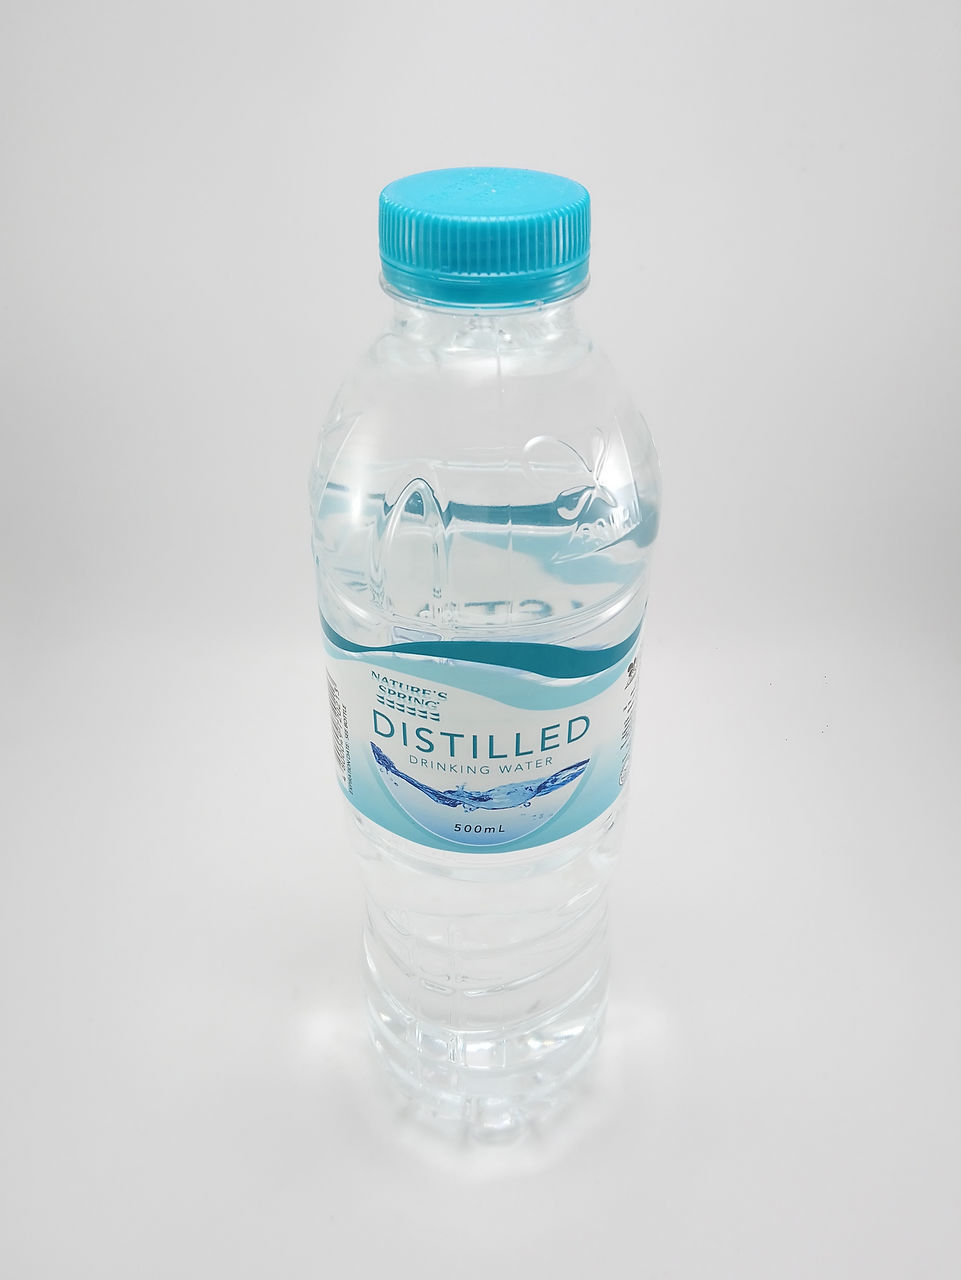 CLOSE-UP OF WATER BOTTLE ON WHITE BACKGROUND